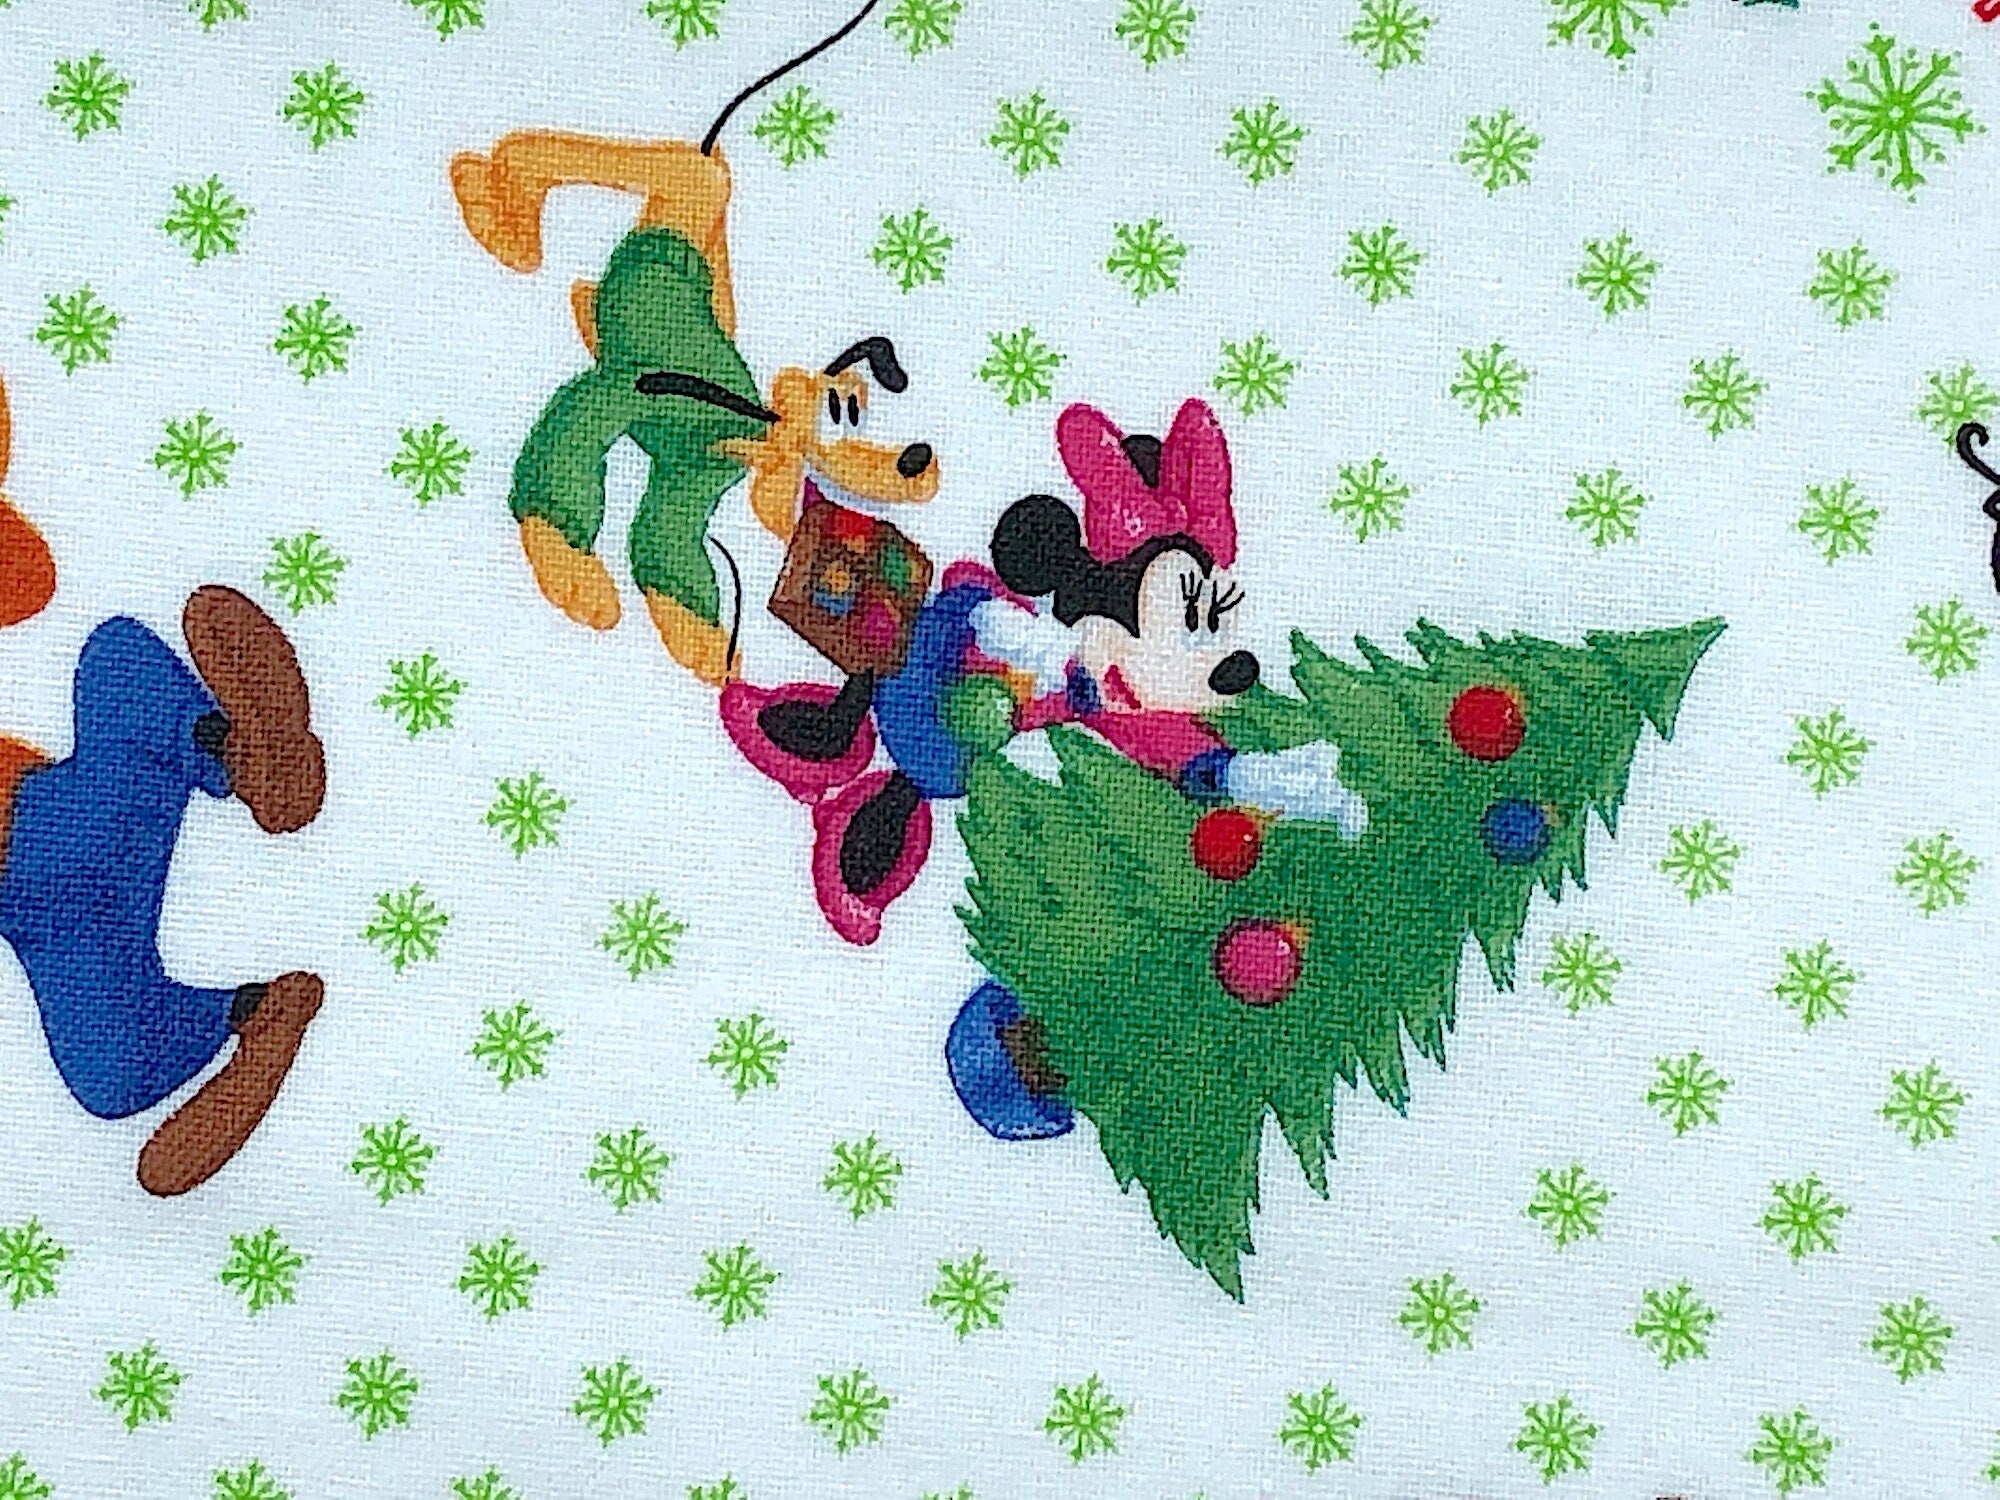 Close up of Minnie mouse decorating a tree.